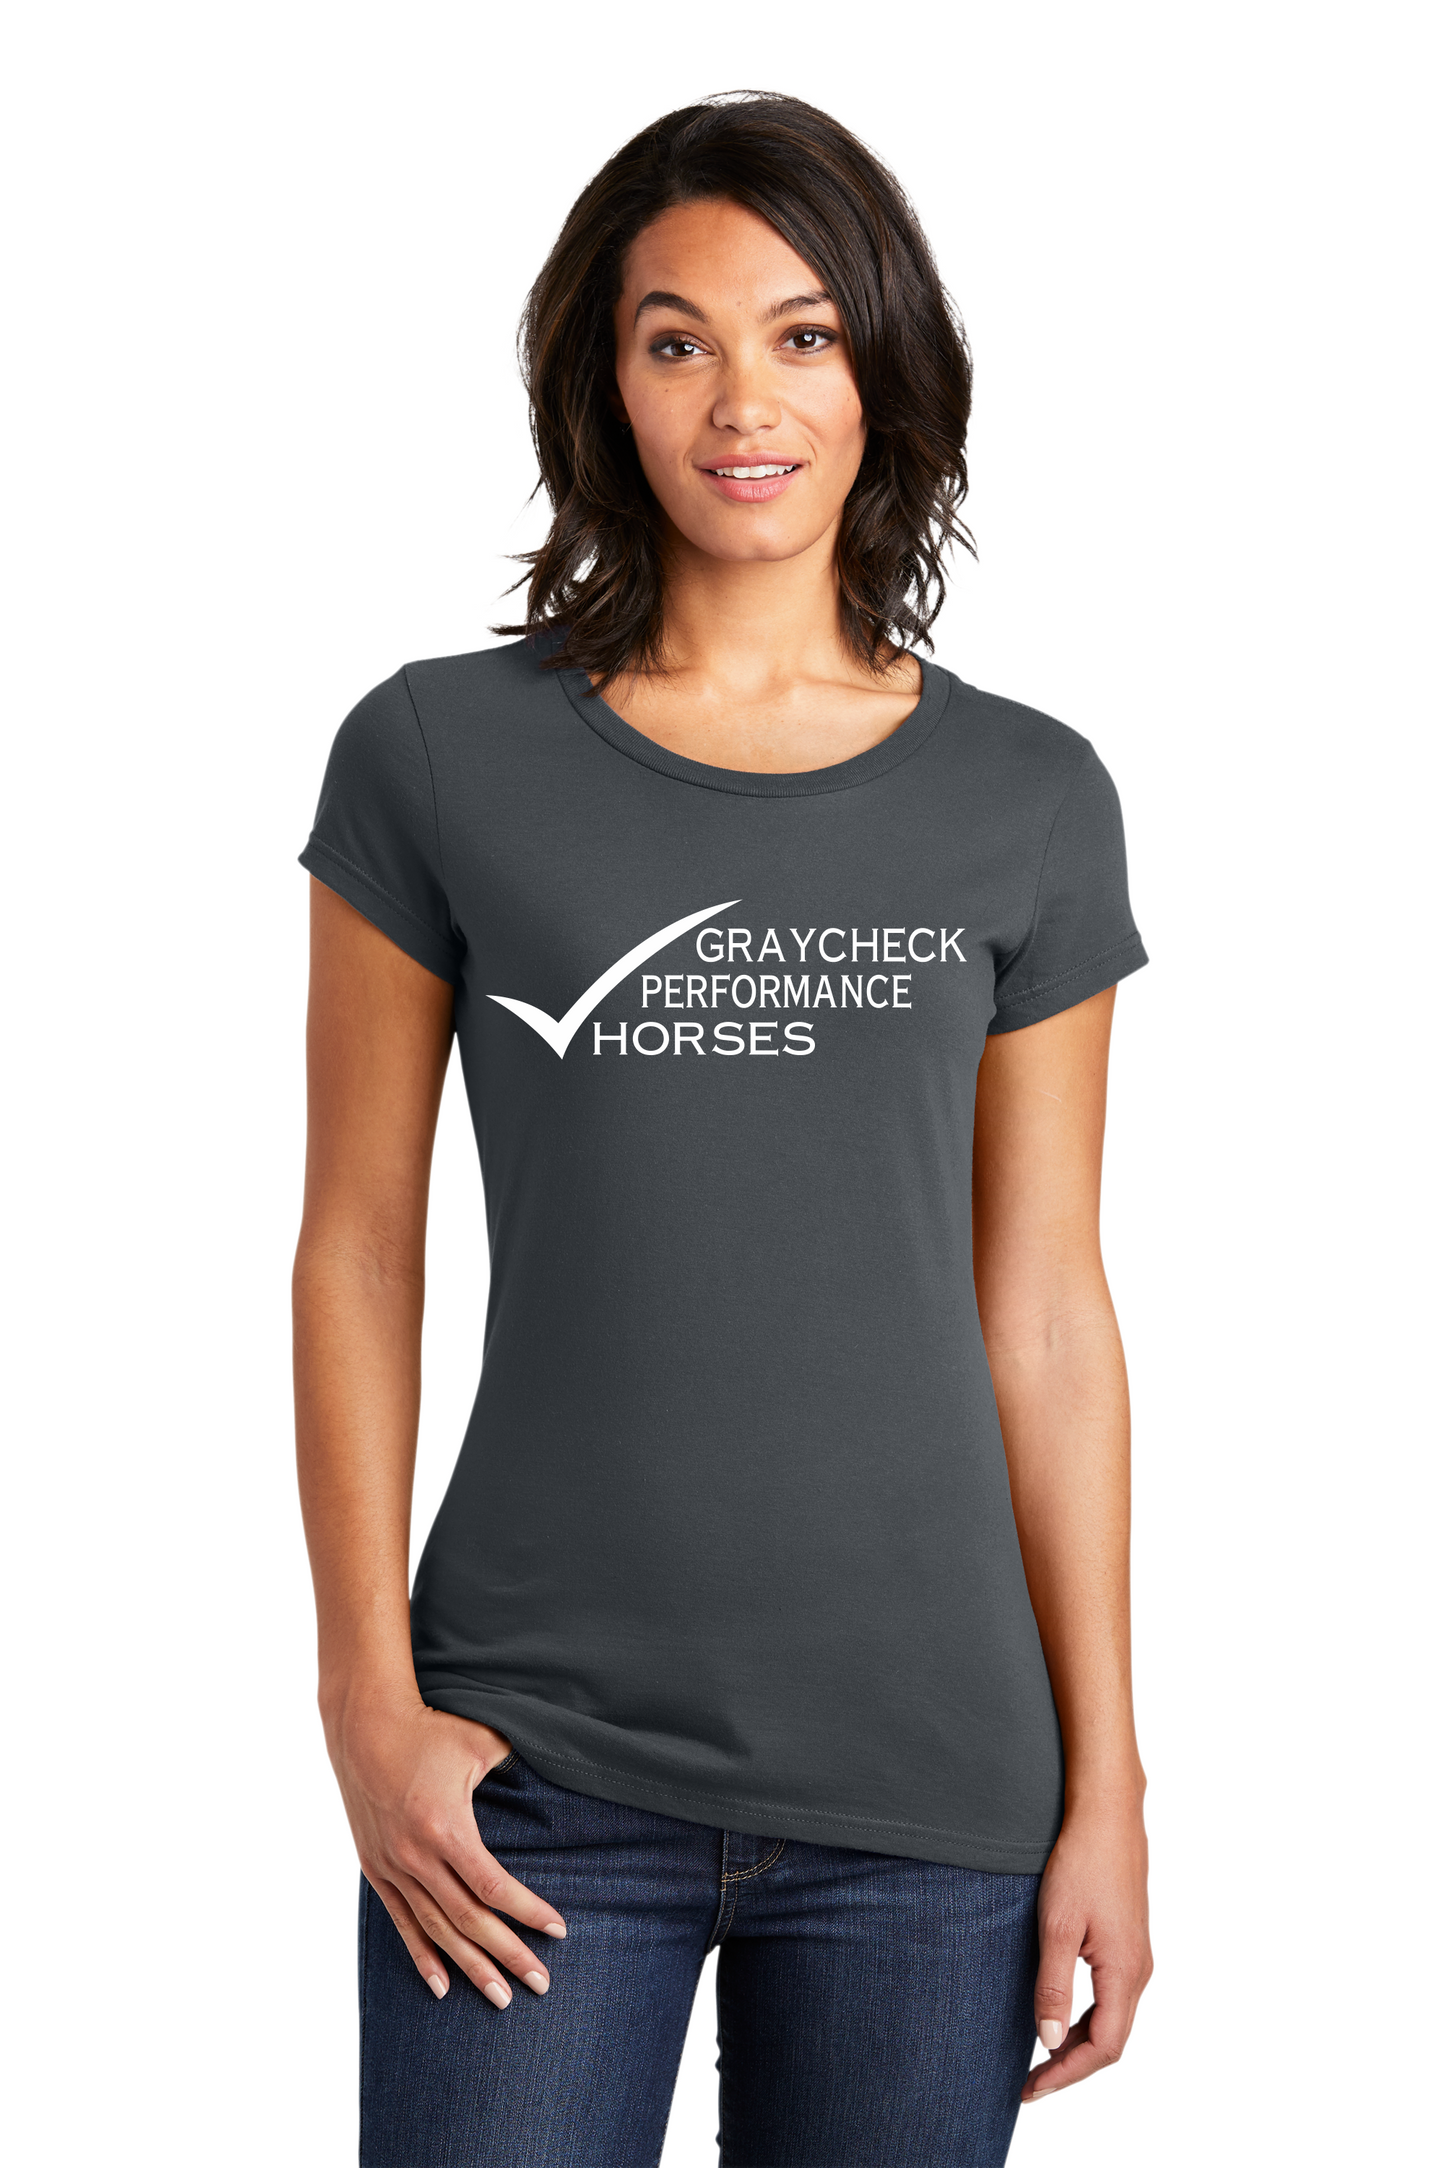 Graycheck- Women's fitted Tee